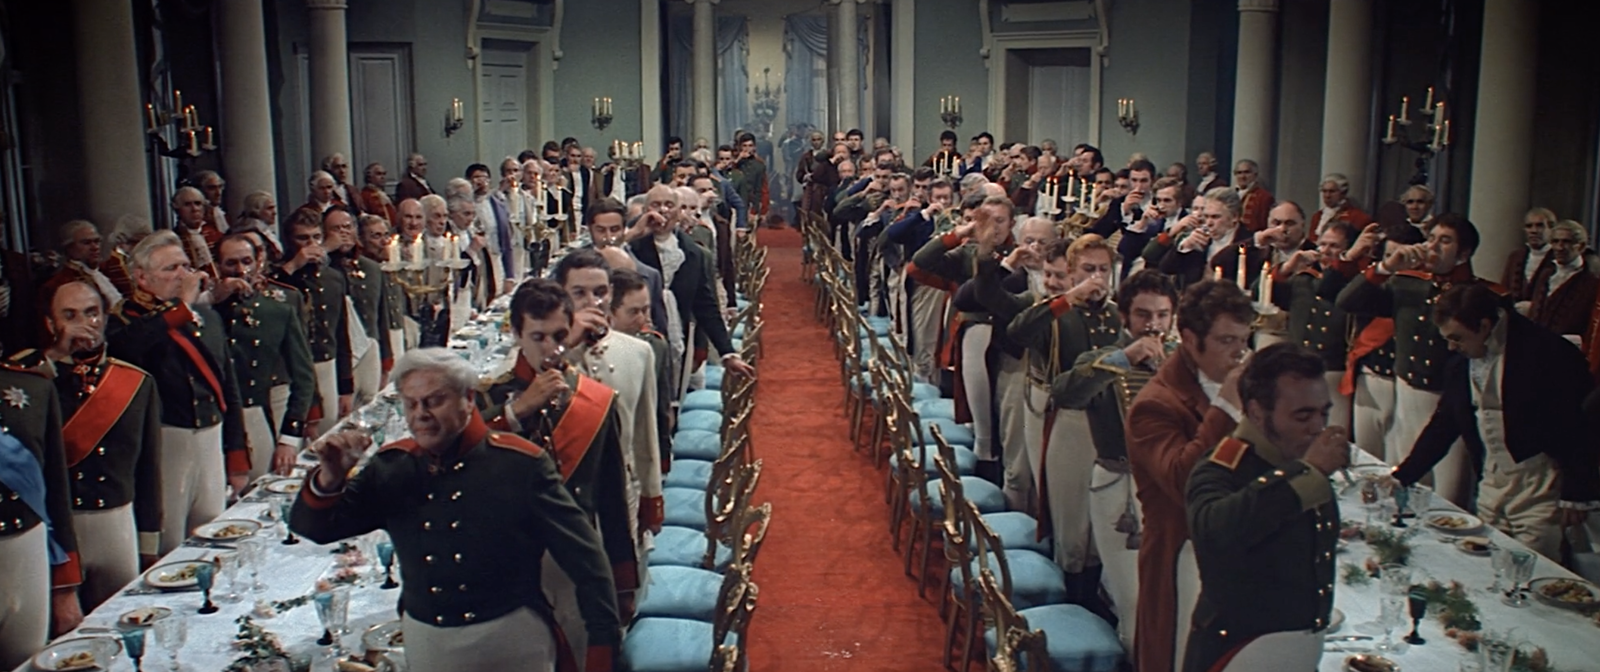 A new restoration of War and Peace by Bondarchuk has been released - Movies, War and Peace, Restoration, HD, Soviet cinema, Video, War and Peace (Tolstoy)